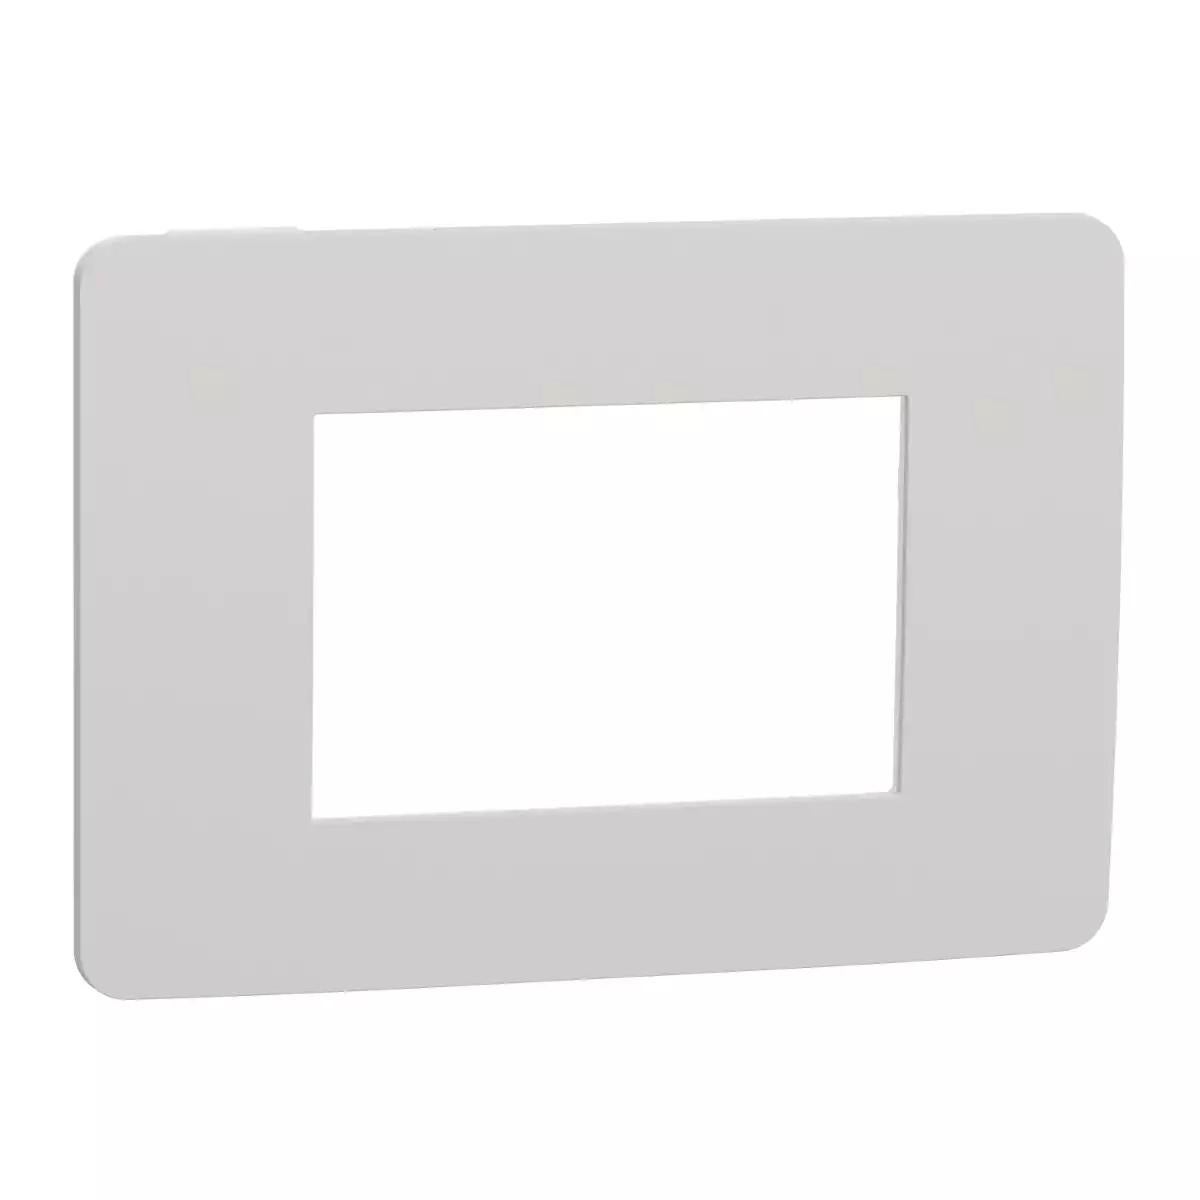 Cover frame, New Unica, 3 modules, light grey or white